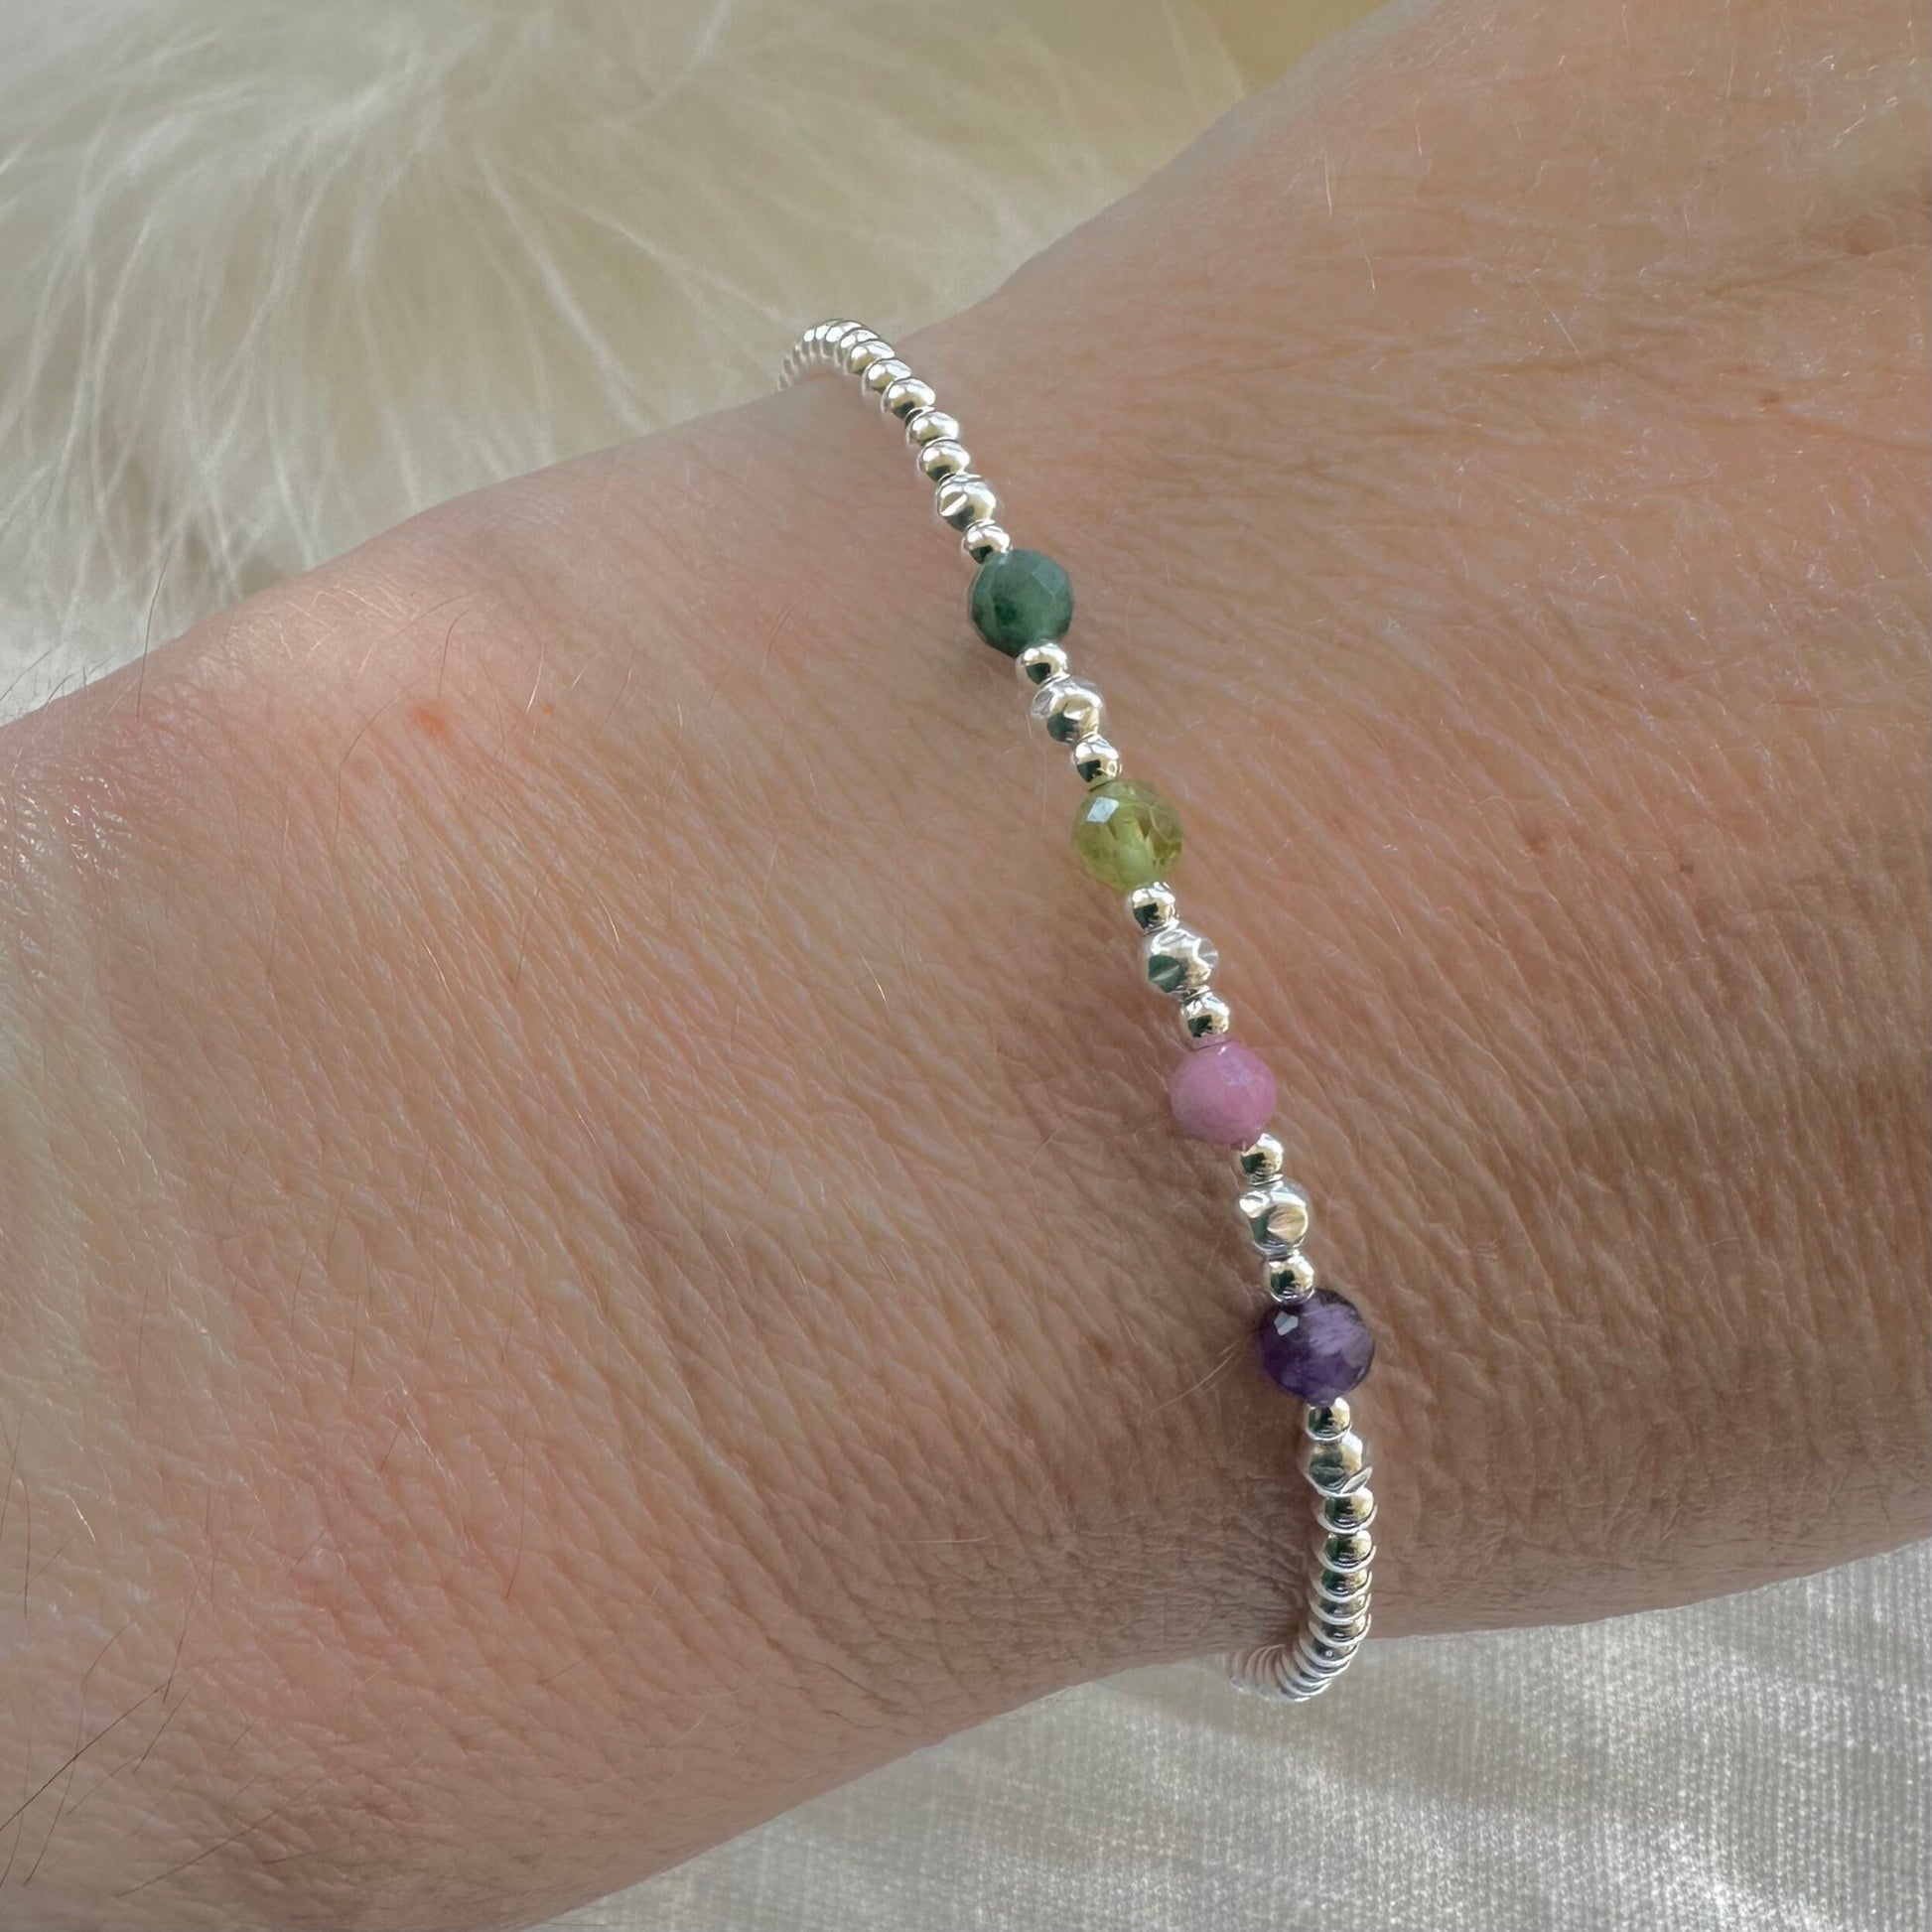 Sterling Silver Slider Bracelet for Mum with Family Birthstones, meaningful gift for Mother’s Day